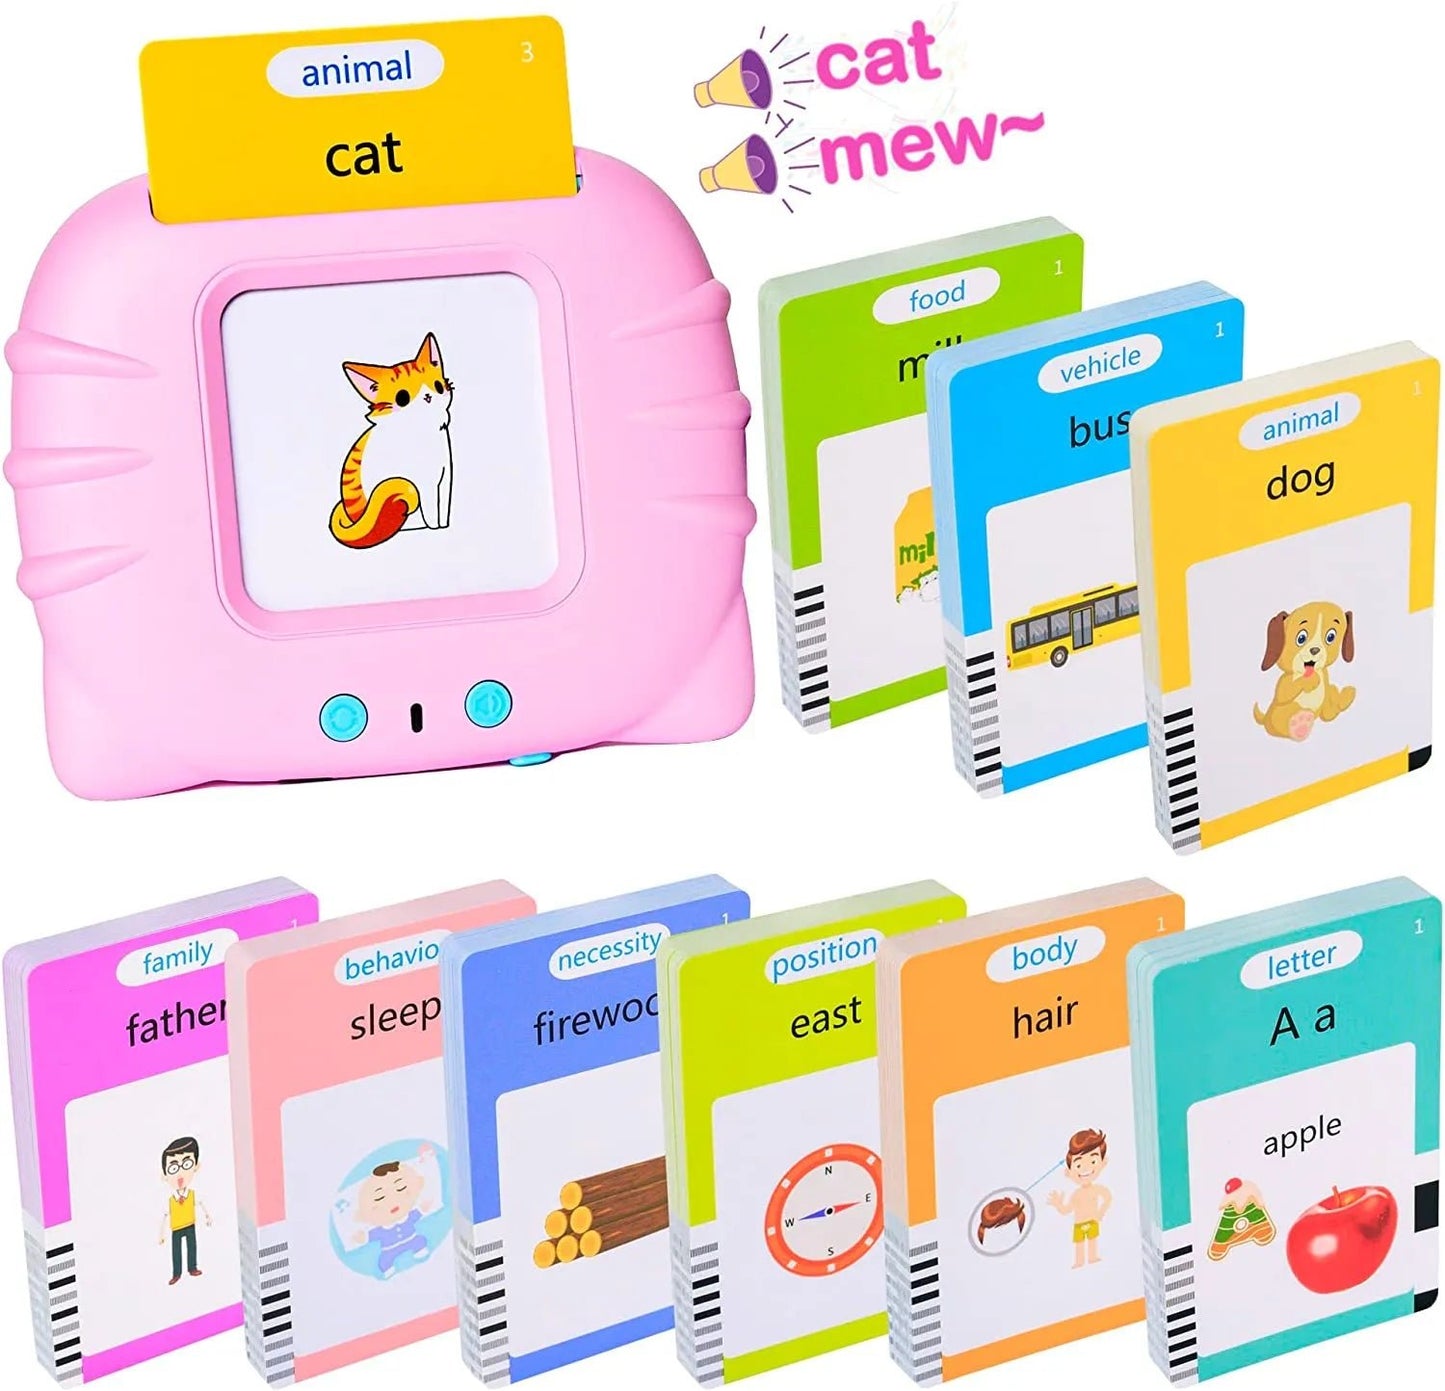 LittleVoices™ Talking Flashcards - Best Gifts for All